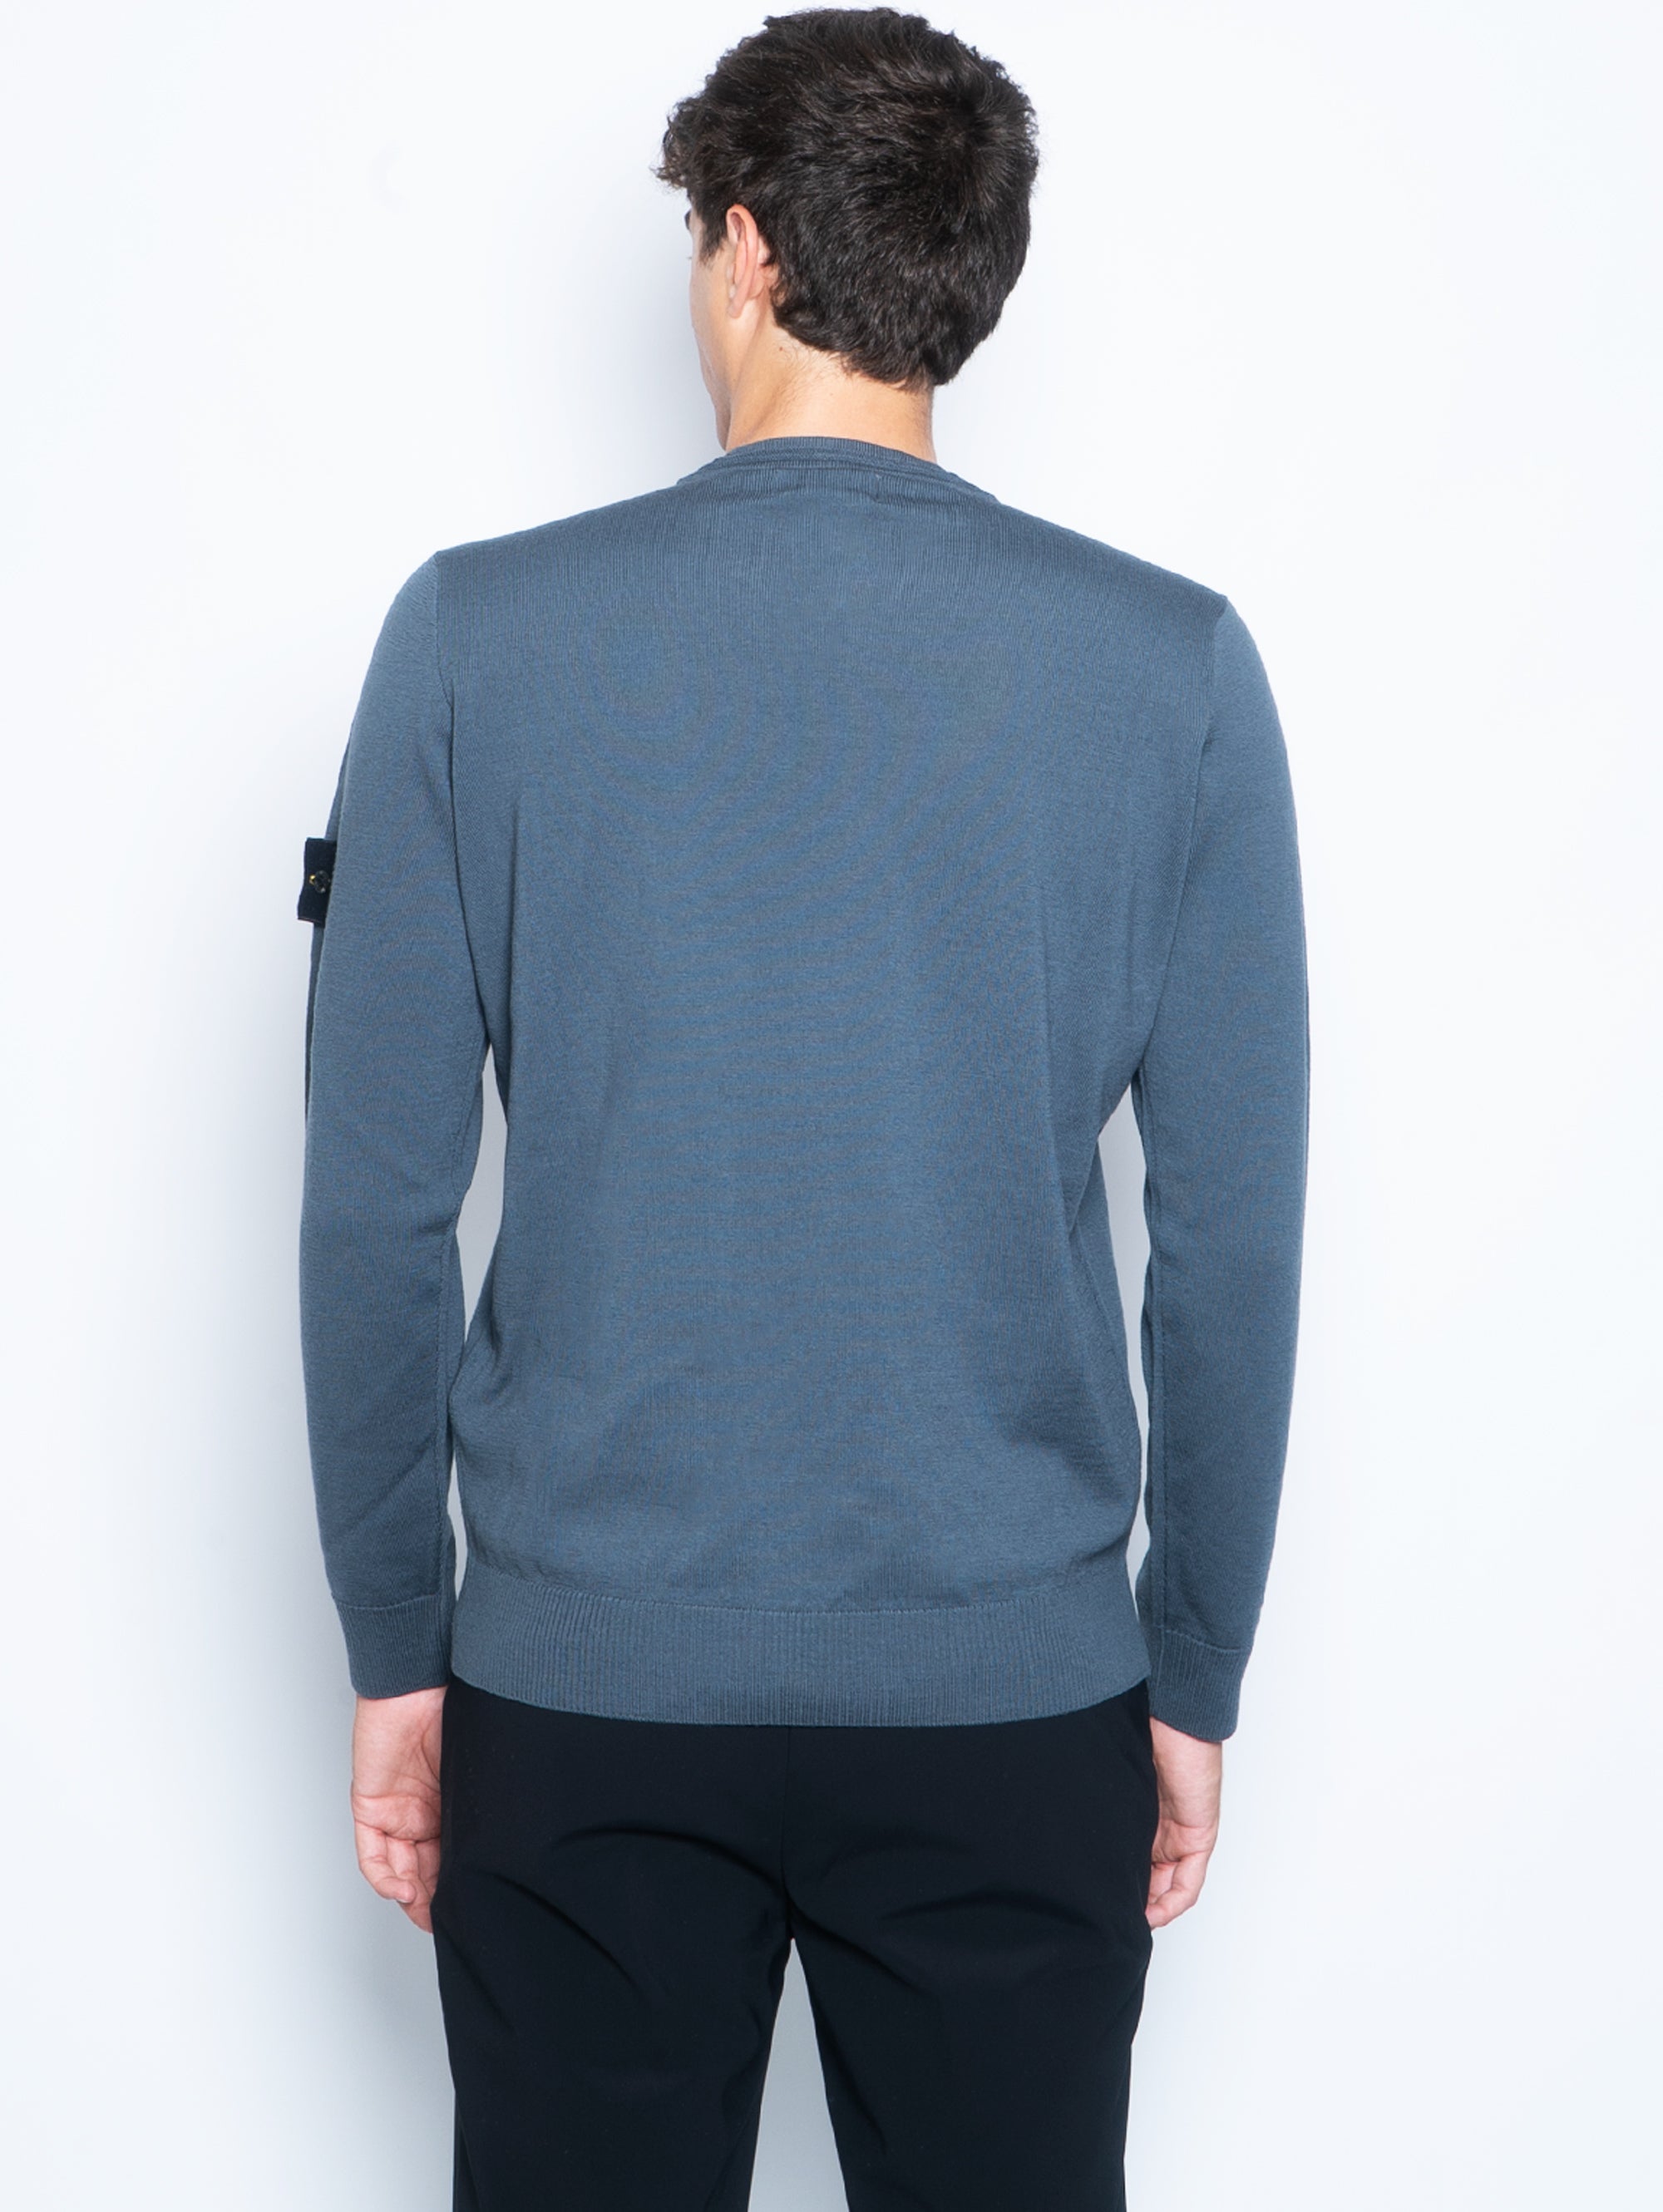 Gray shaved wool sweater